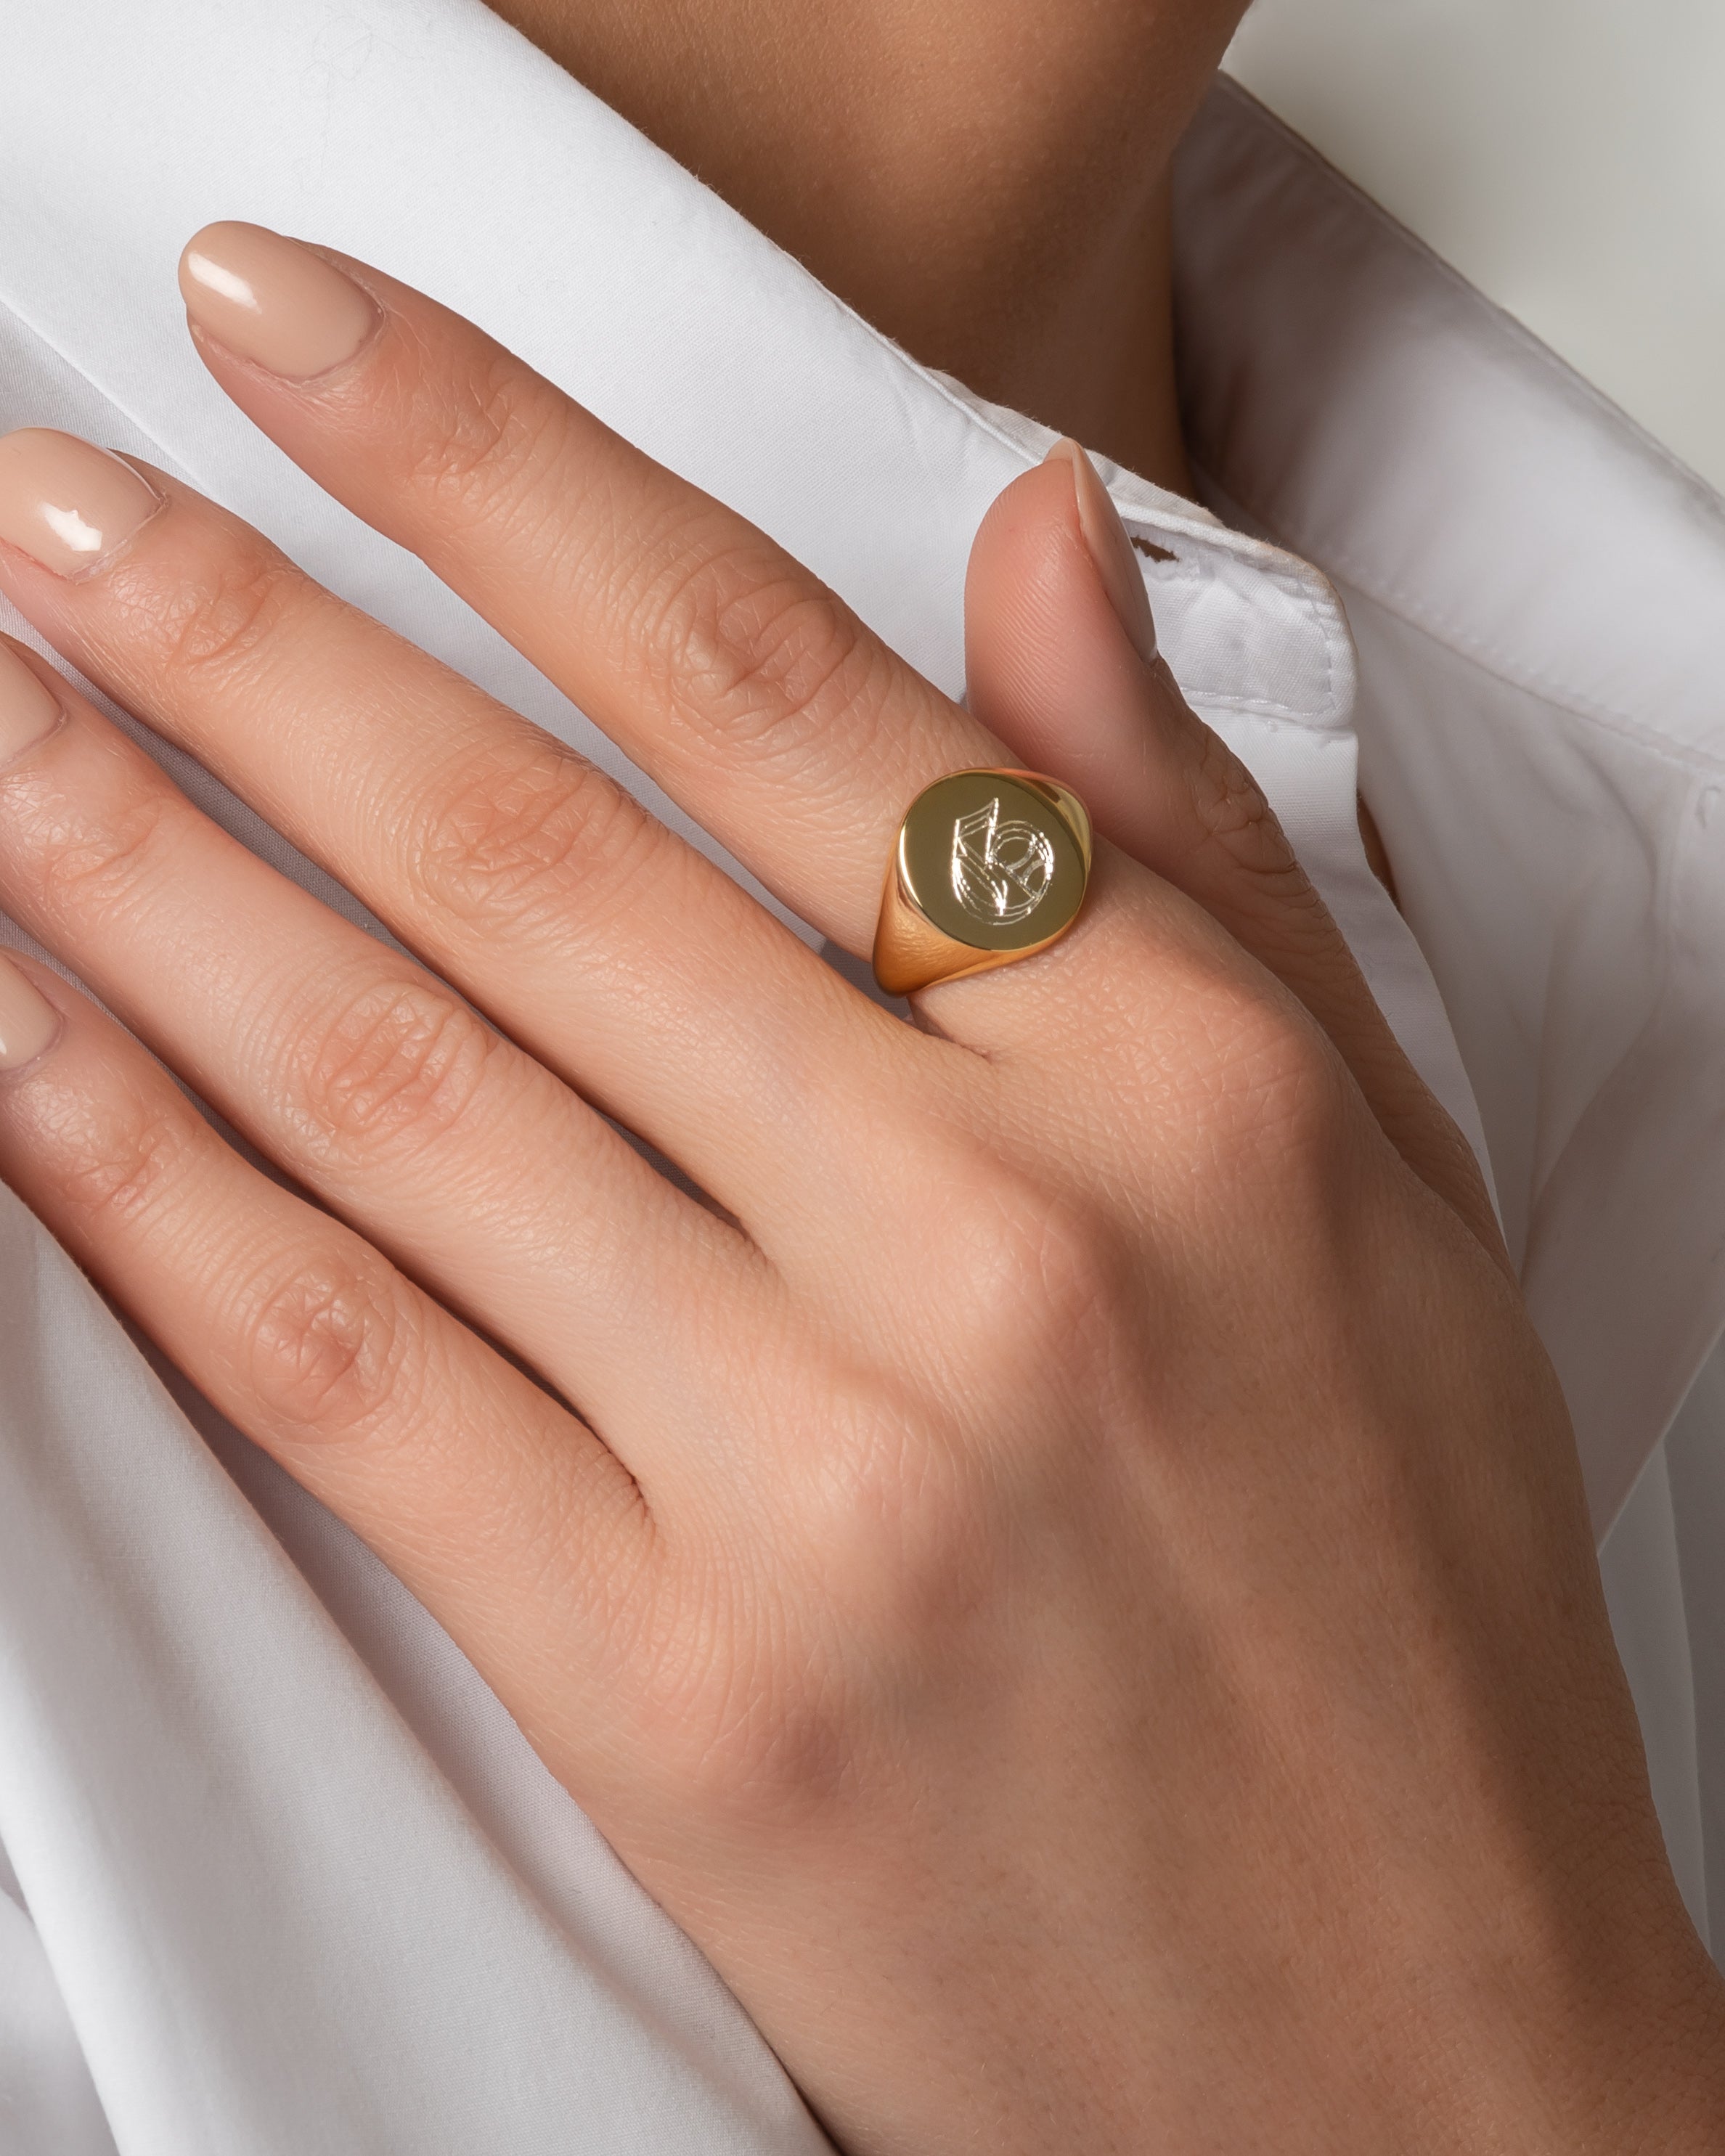 Custom Letter Ring - Monogram Ring Big Square - Silver and Gold